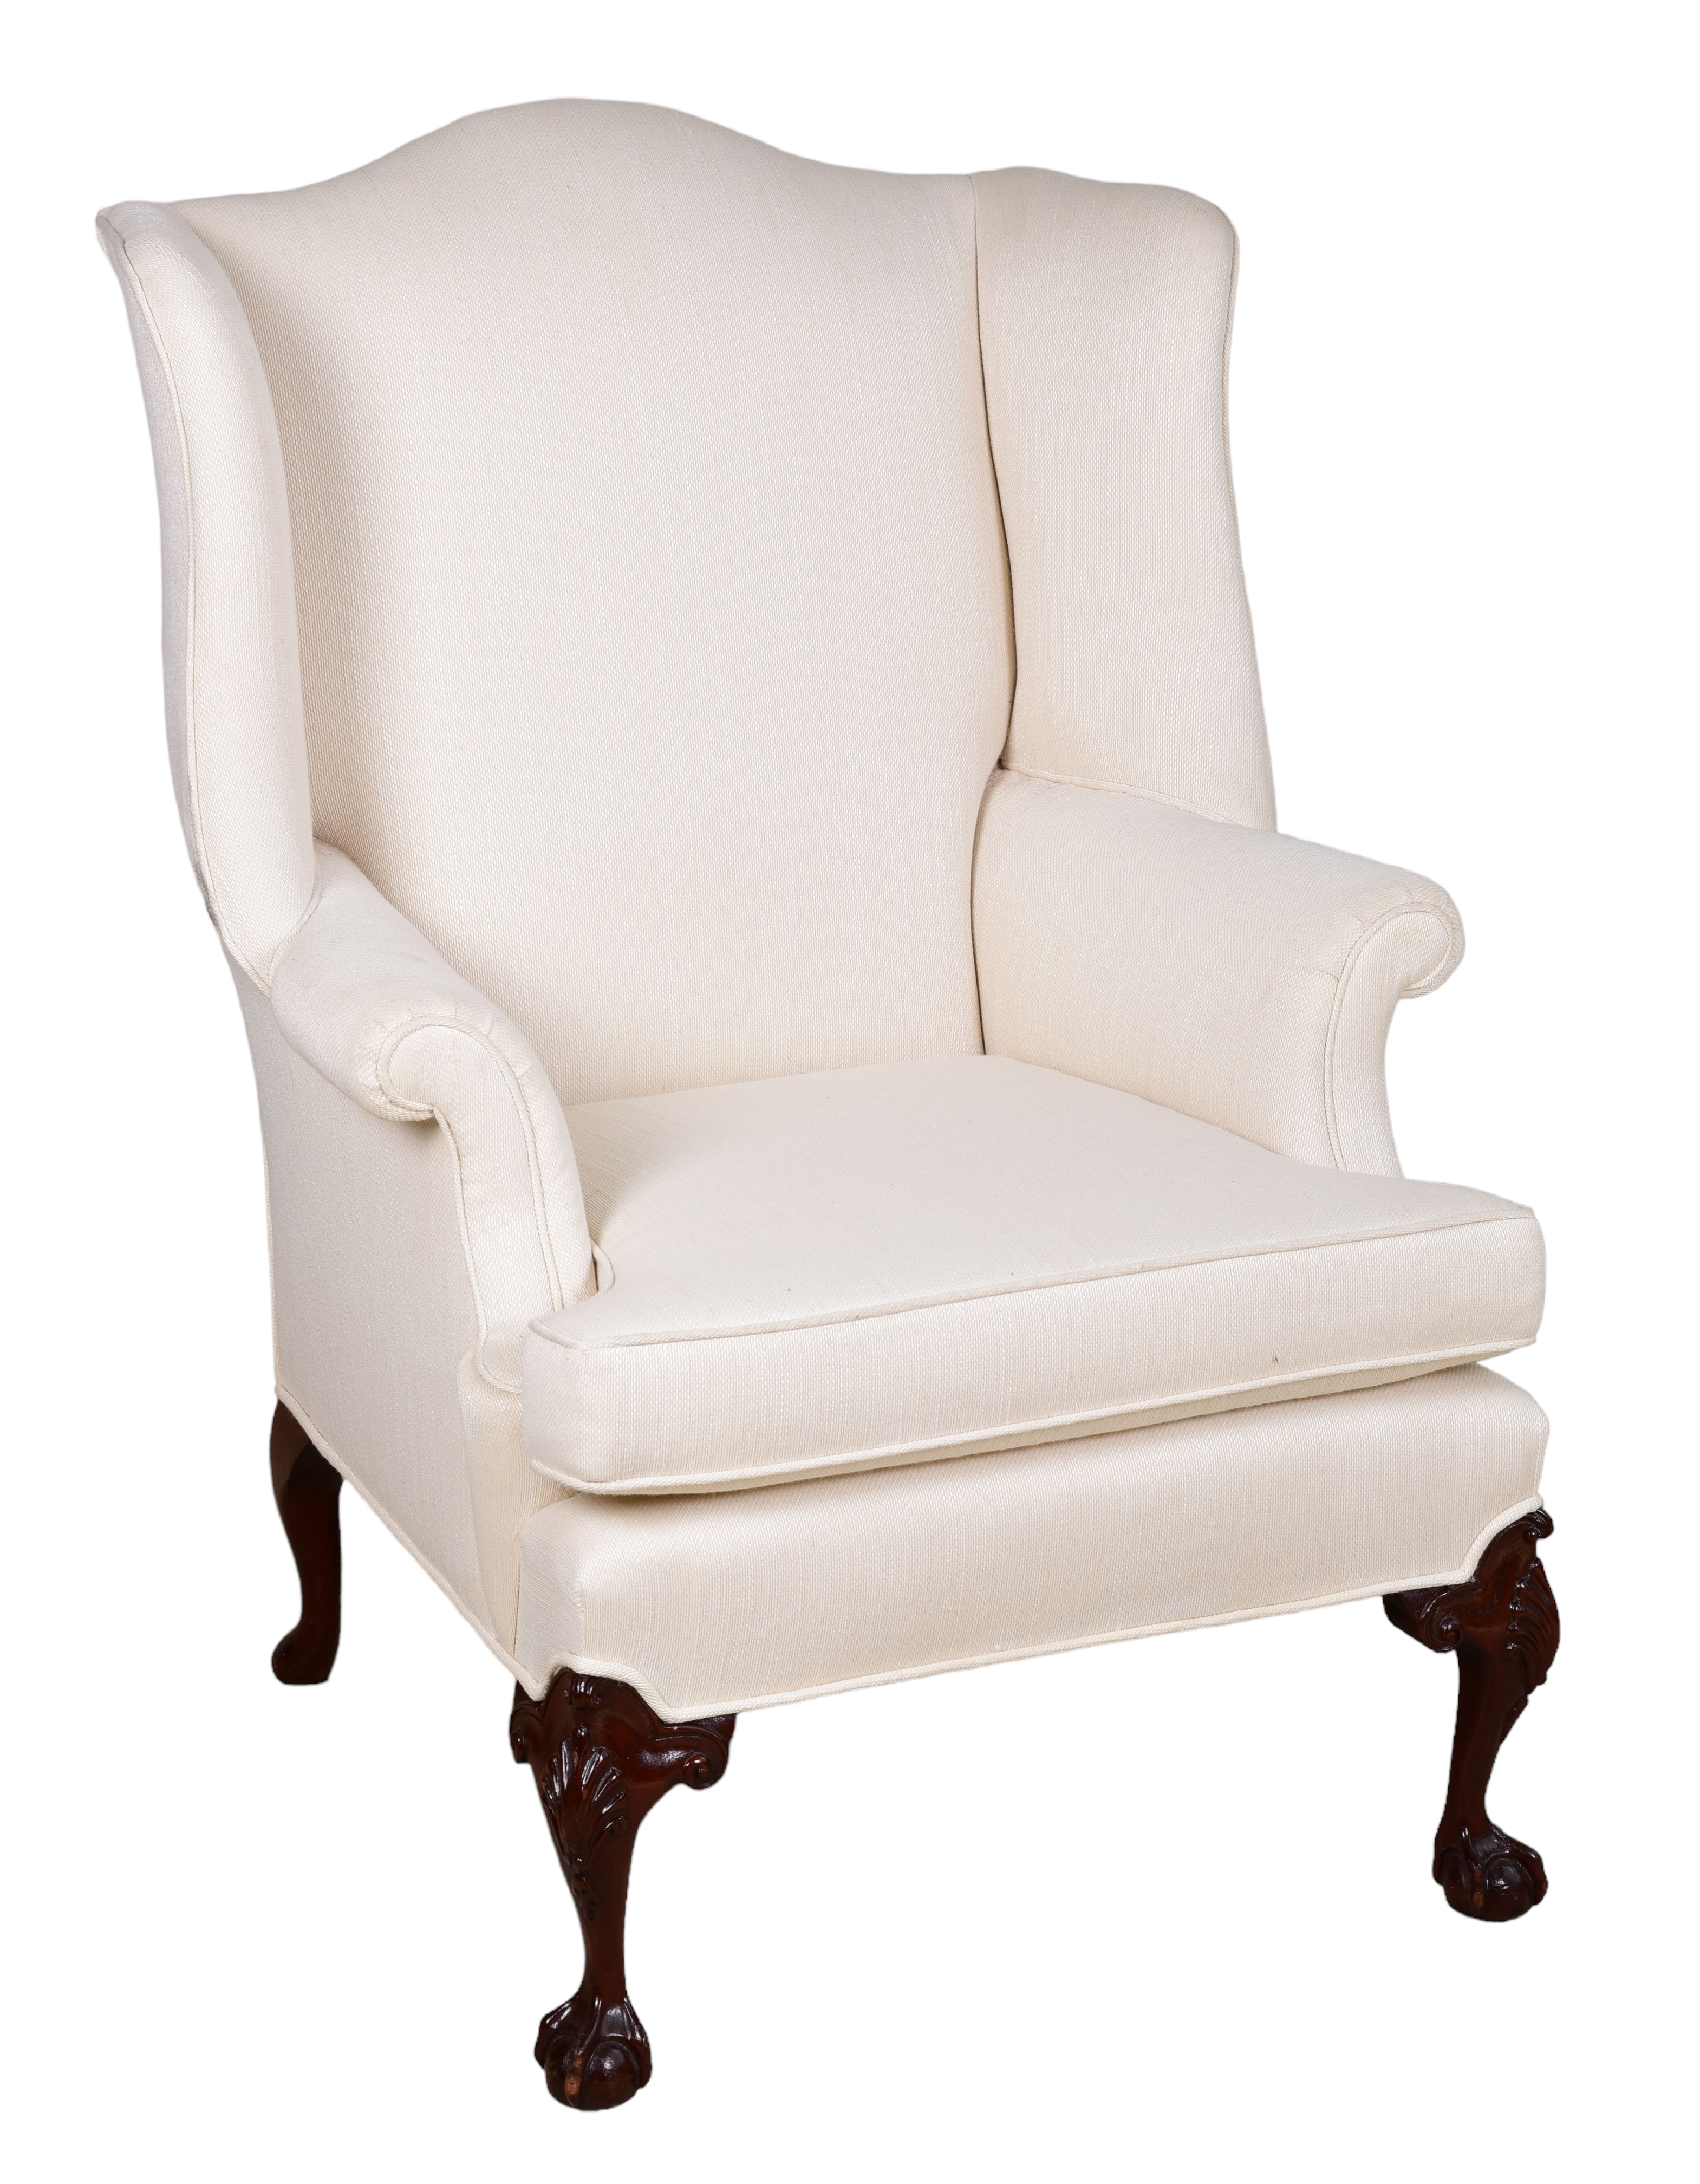 Chippendale style upholstered wing